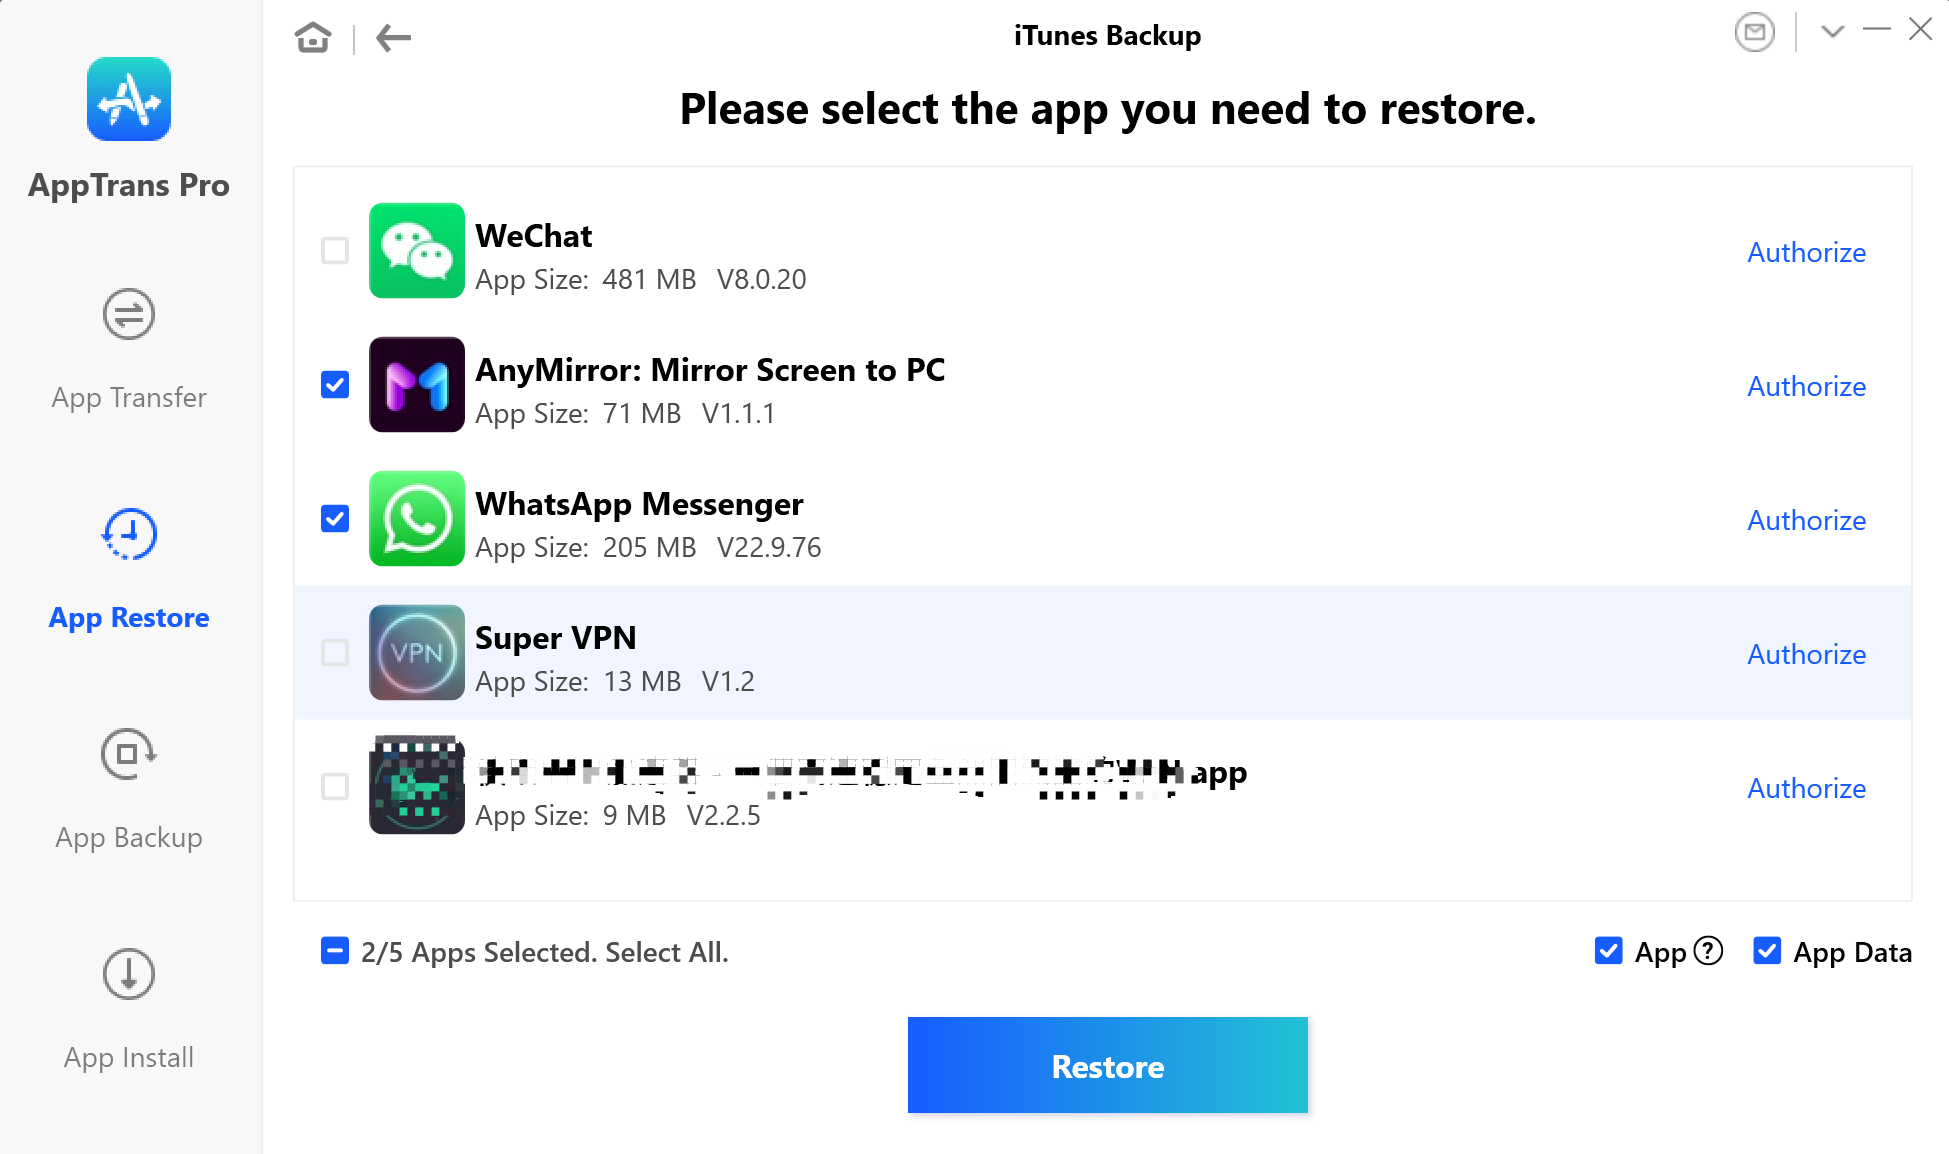 Select the App You Need to Restore